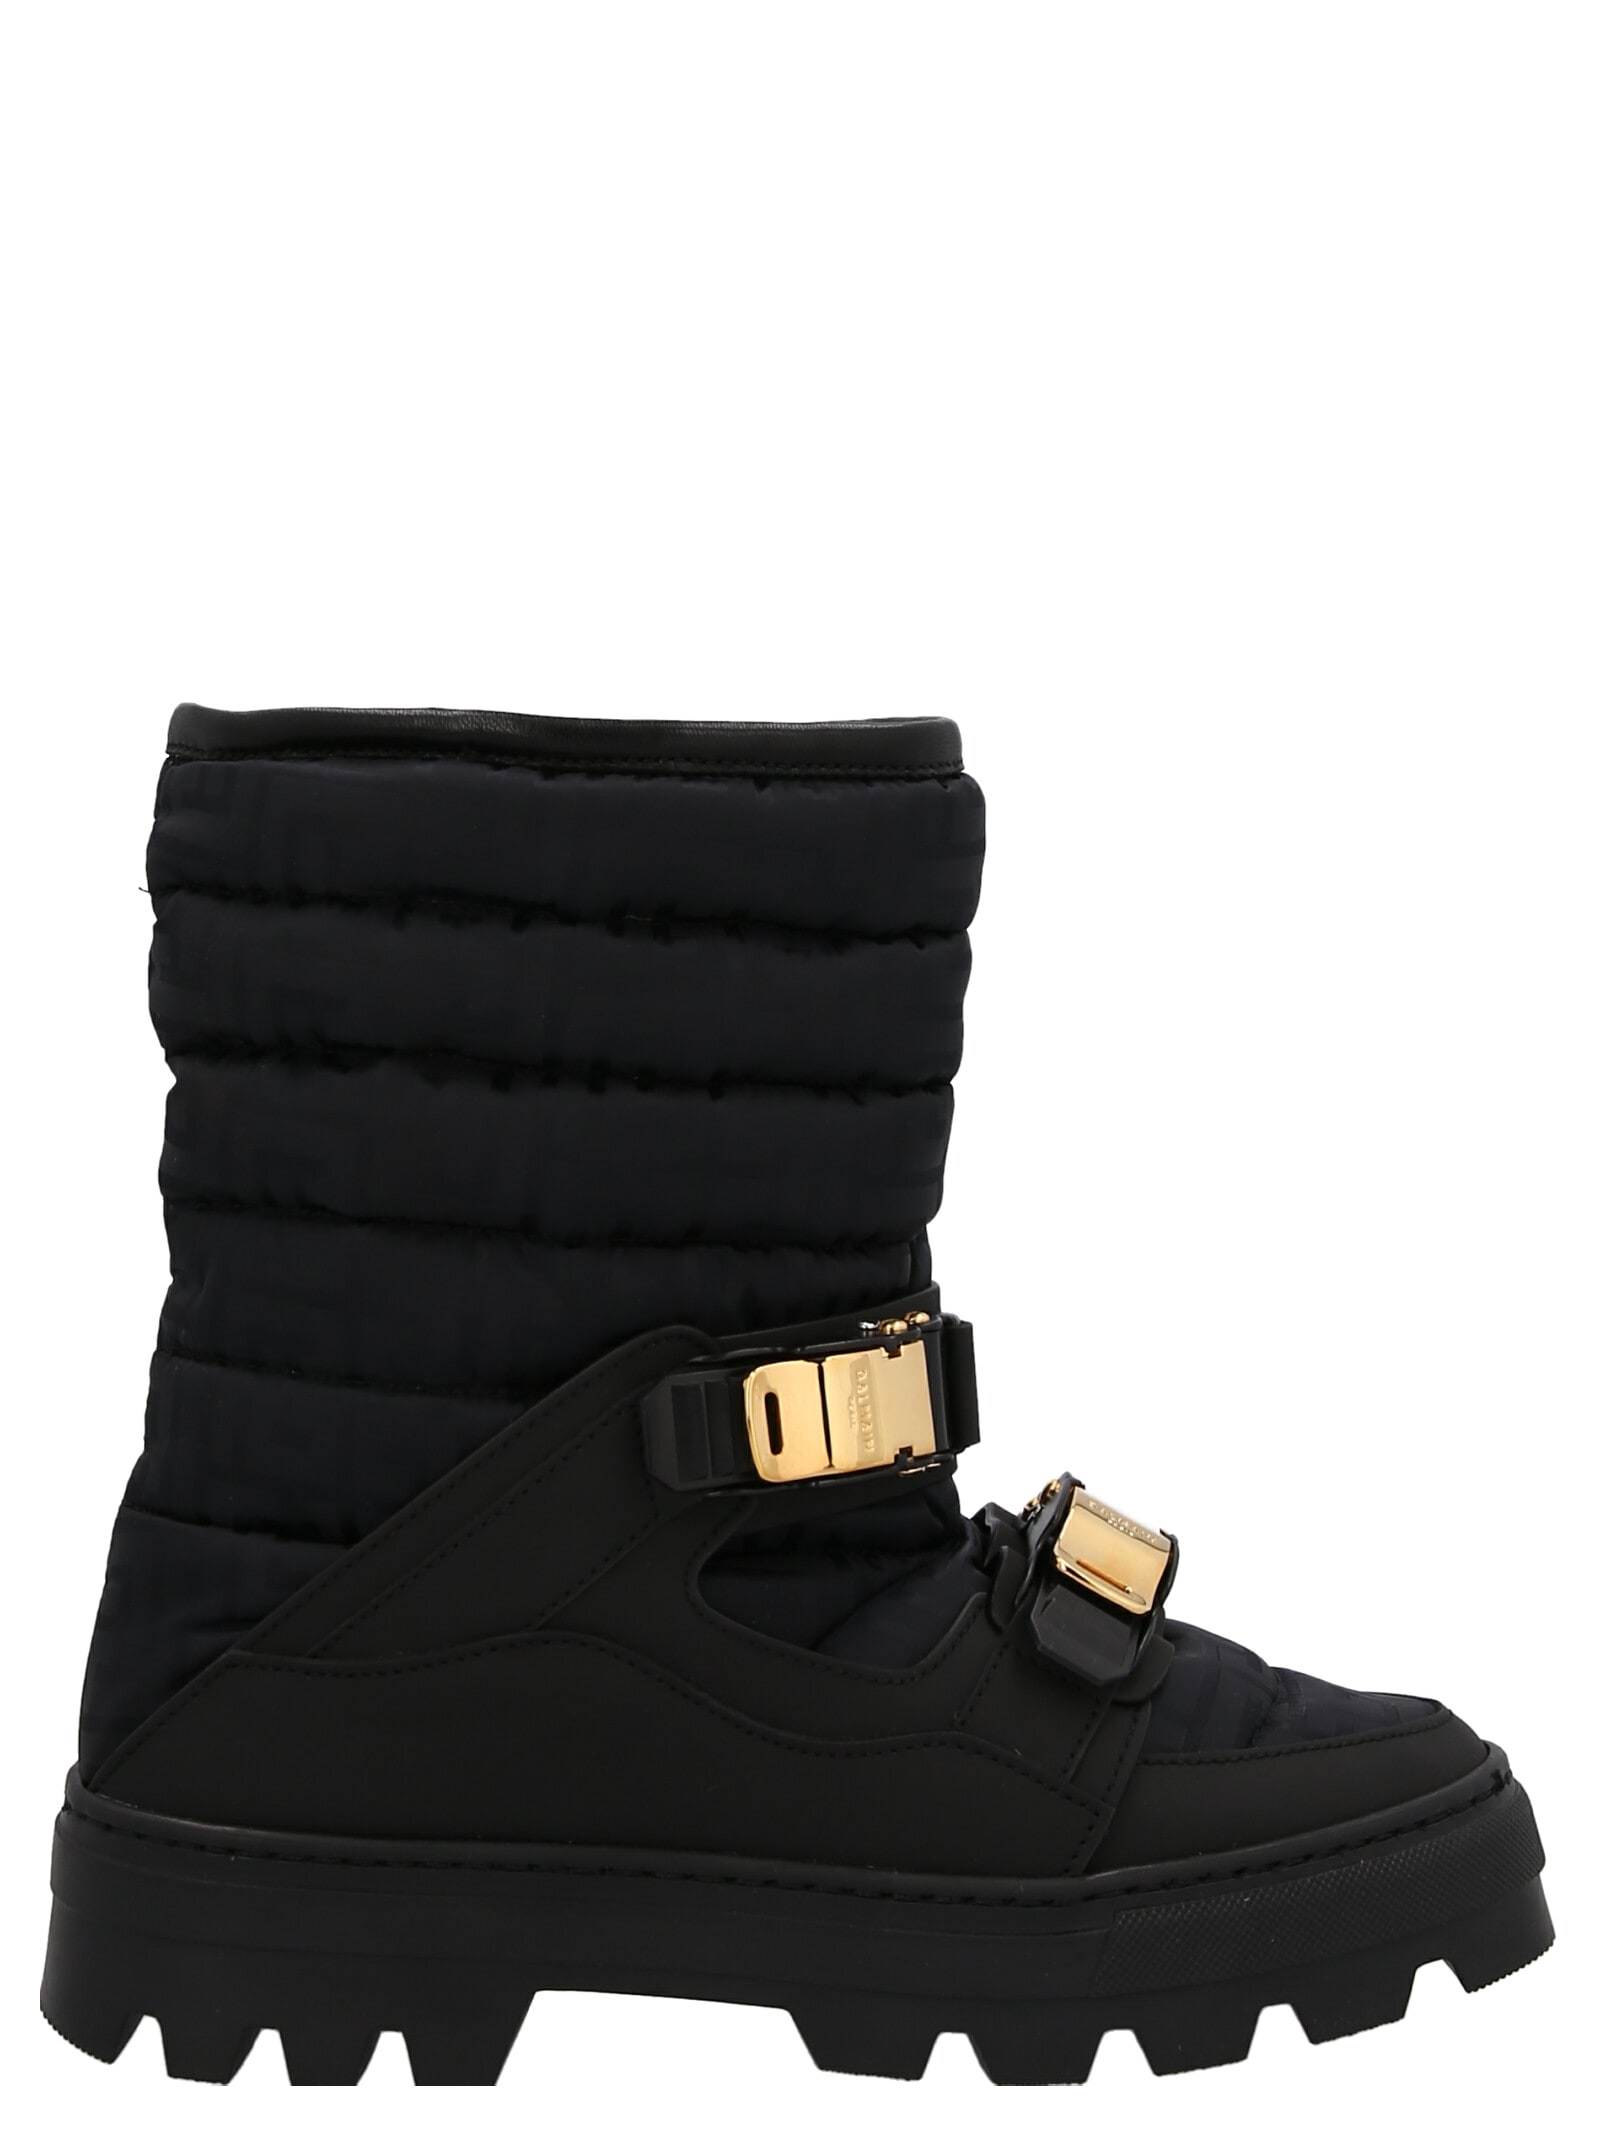 BALMAIN AFTER SKI CAPSULE ANKLE BOOTS